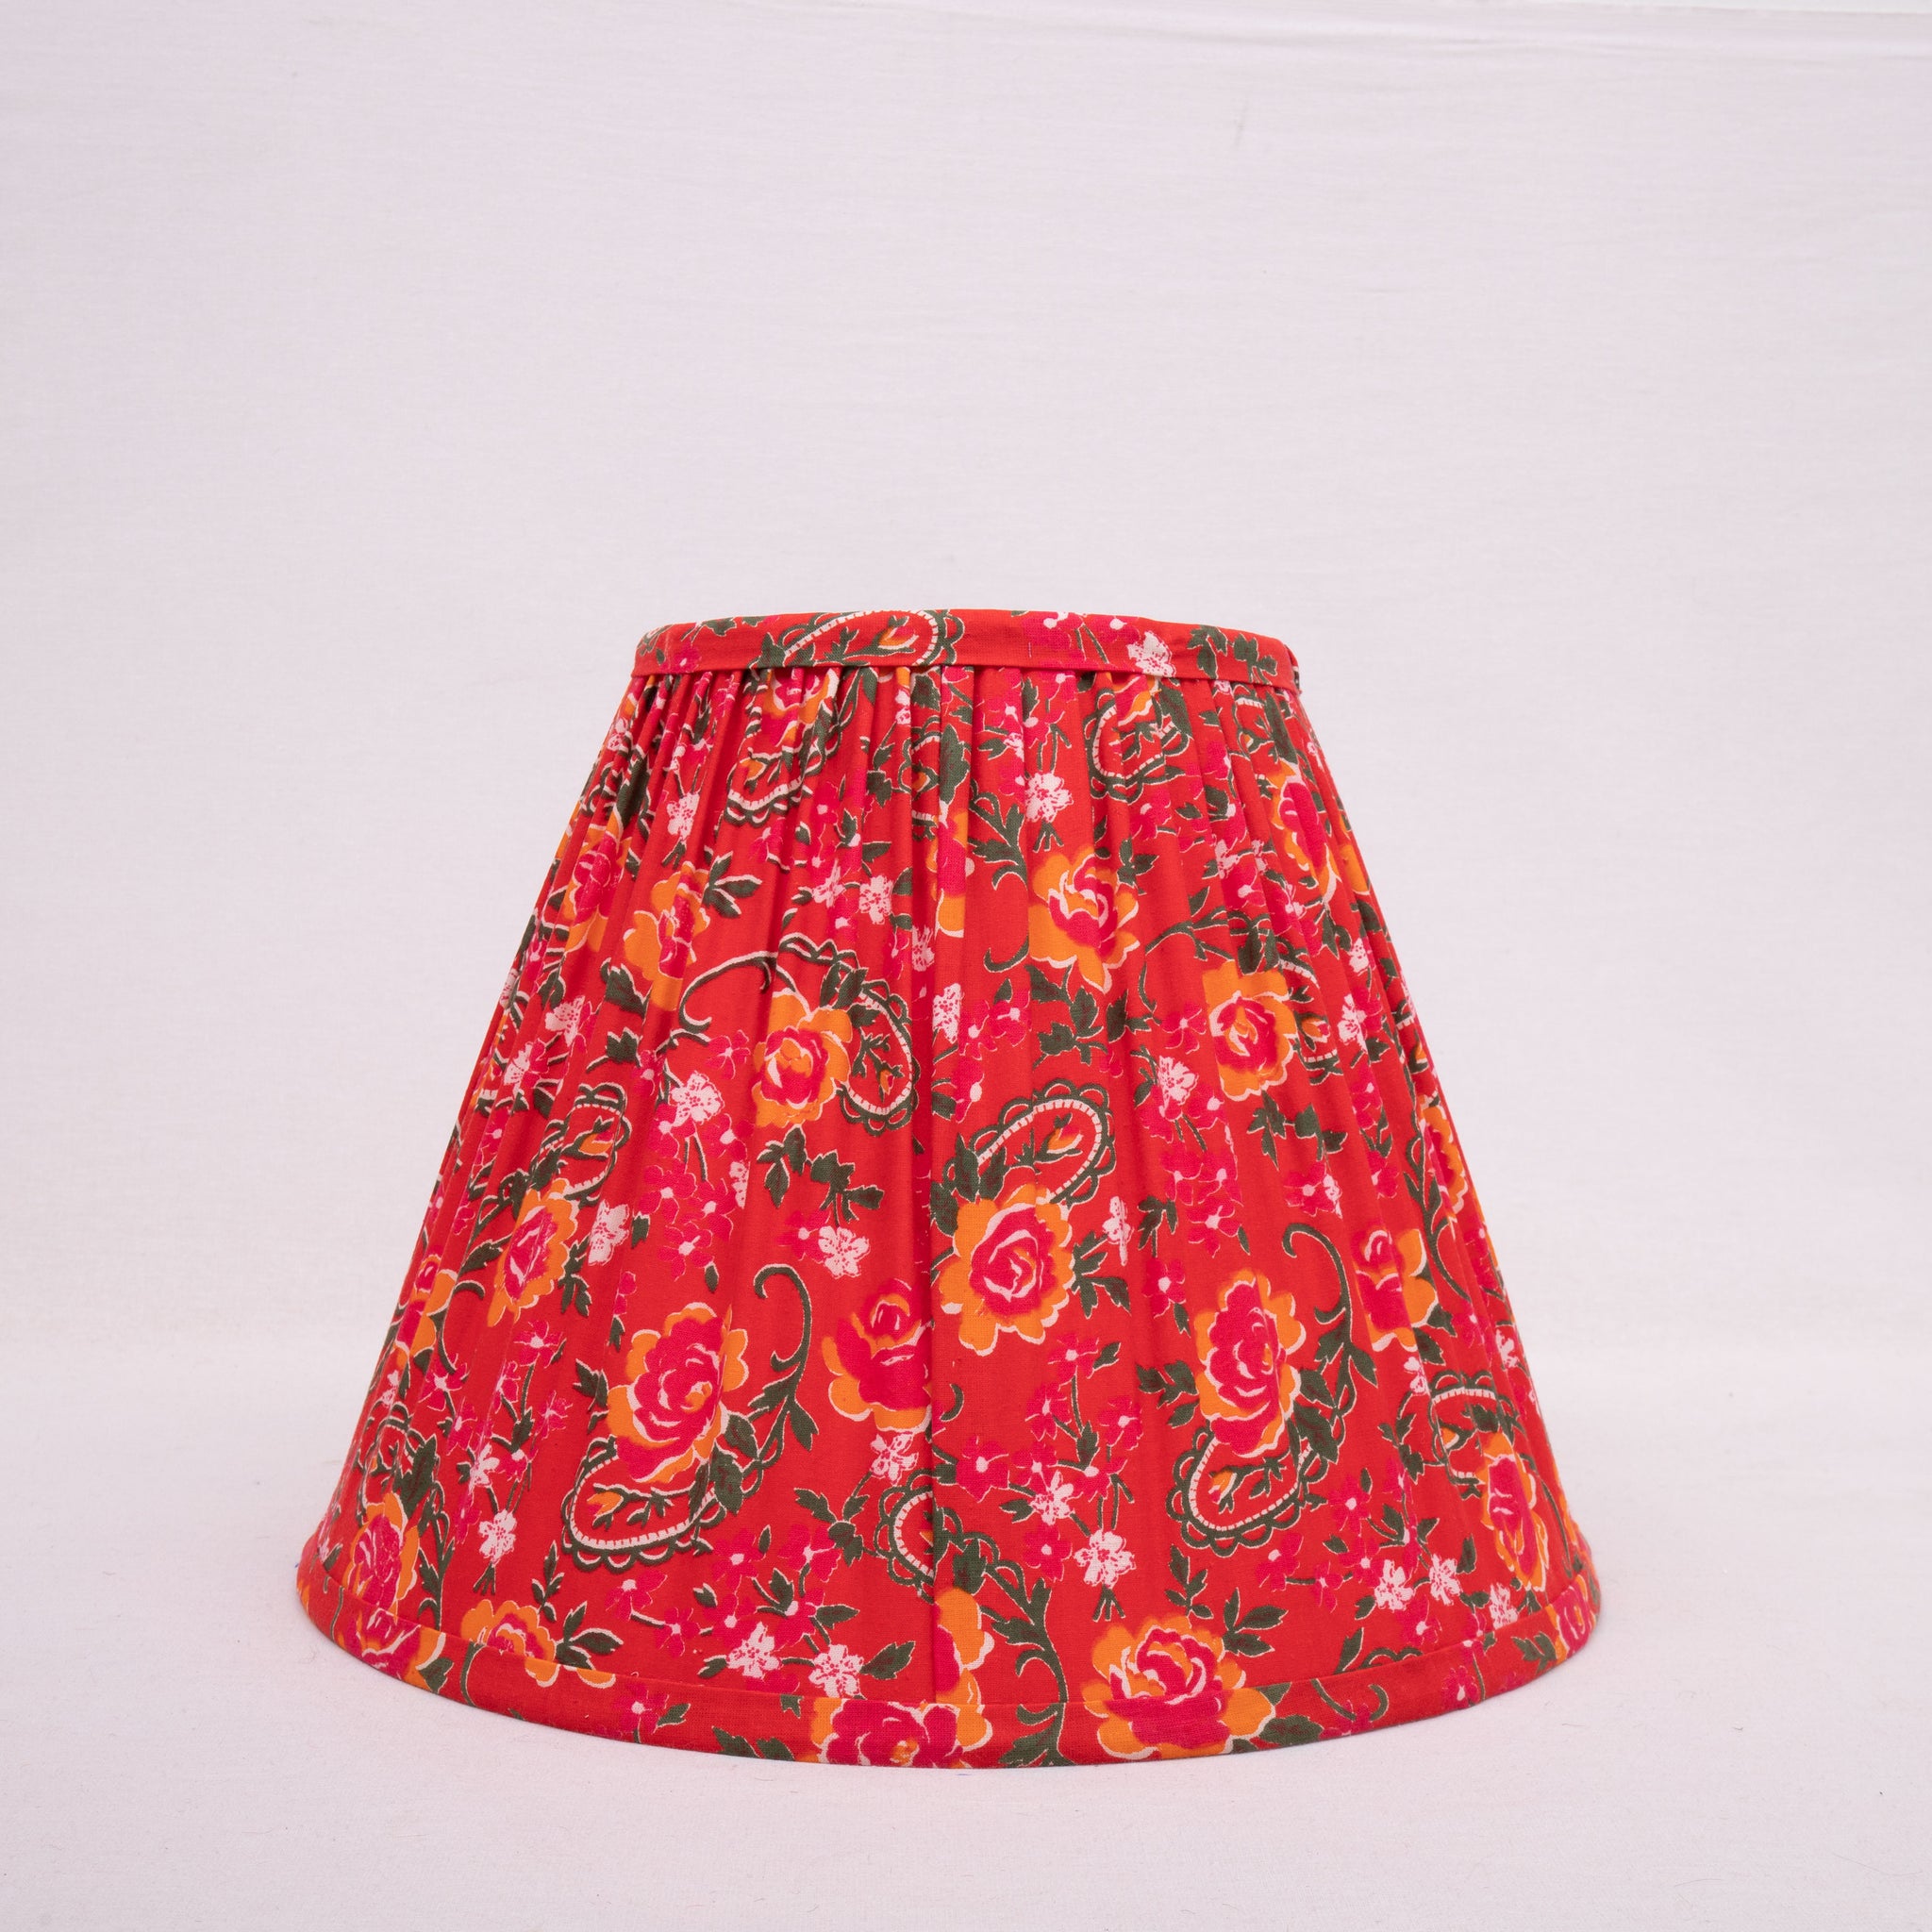 Floral Paisley Roller Cloth Lampshade